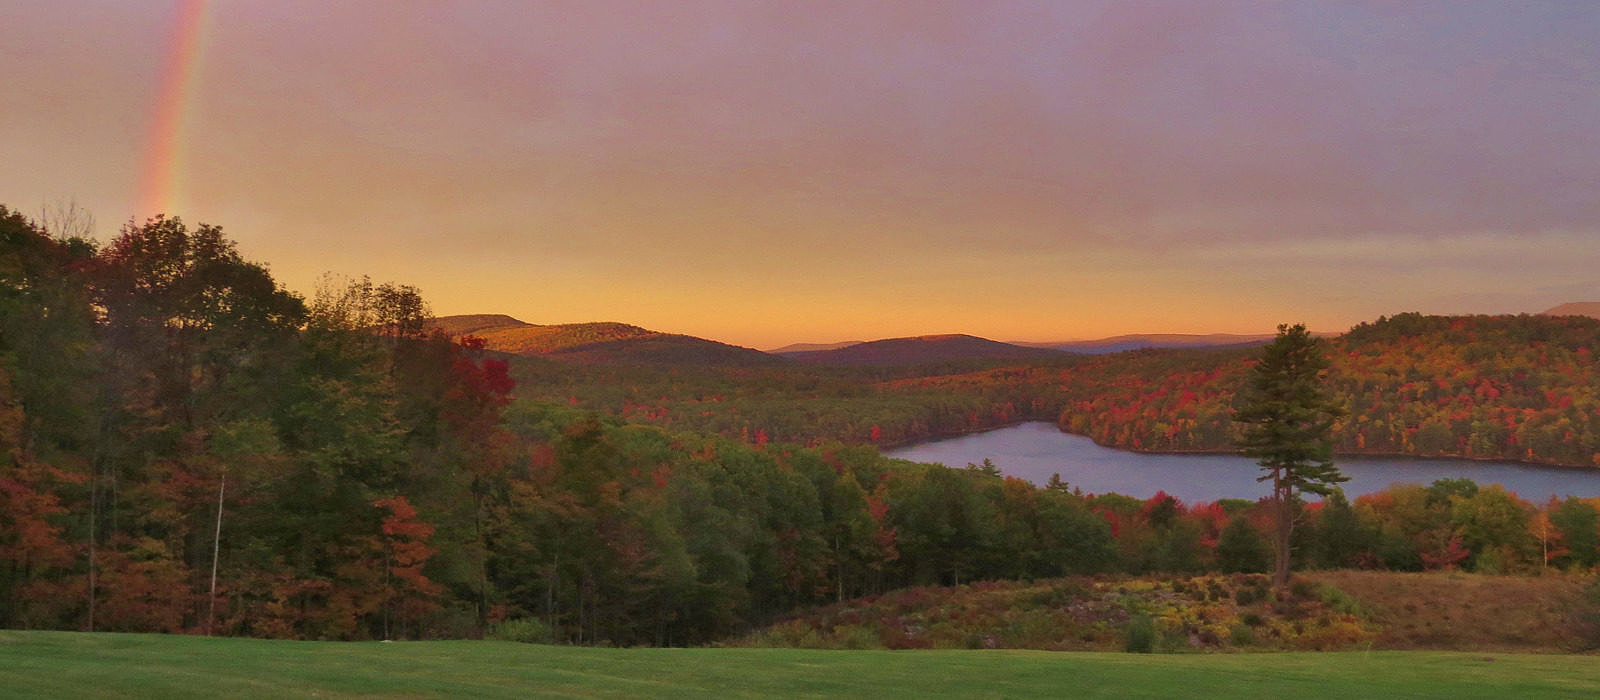 A rainbow over Spoonwood Pond, in autumn color. (photo © Meade Cadot)